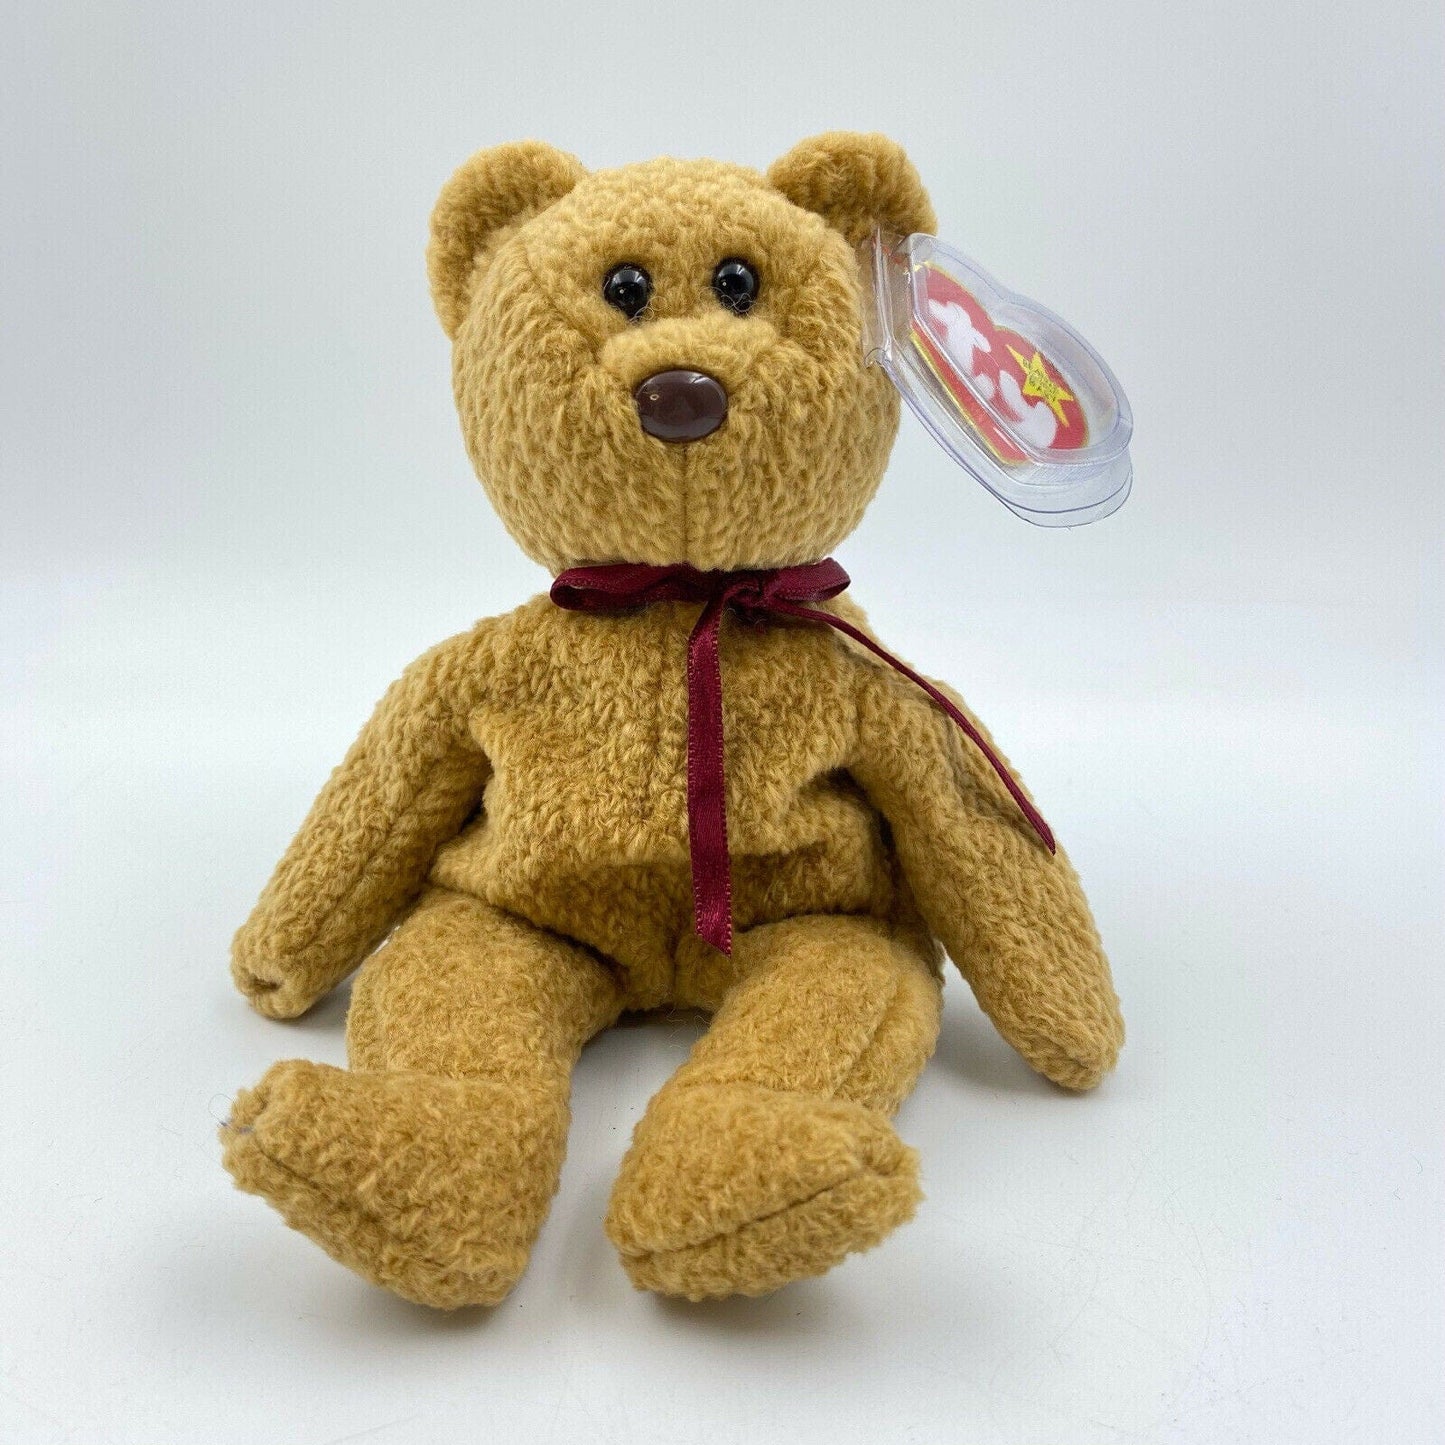 Rare Ty Original Beanie Babies “Curly” The Bear 1993 W/ Brown Nose Tag Errors